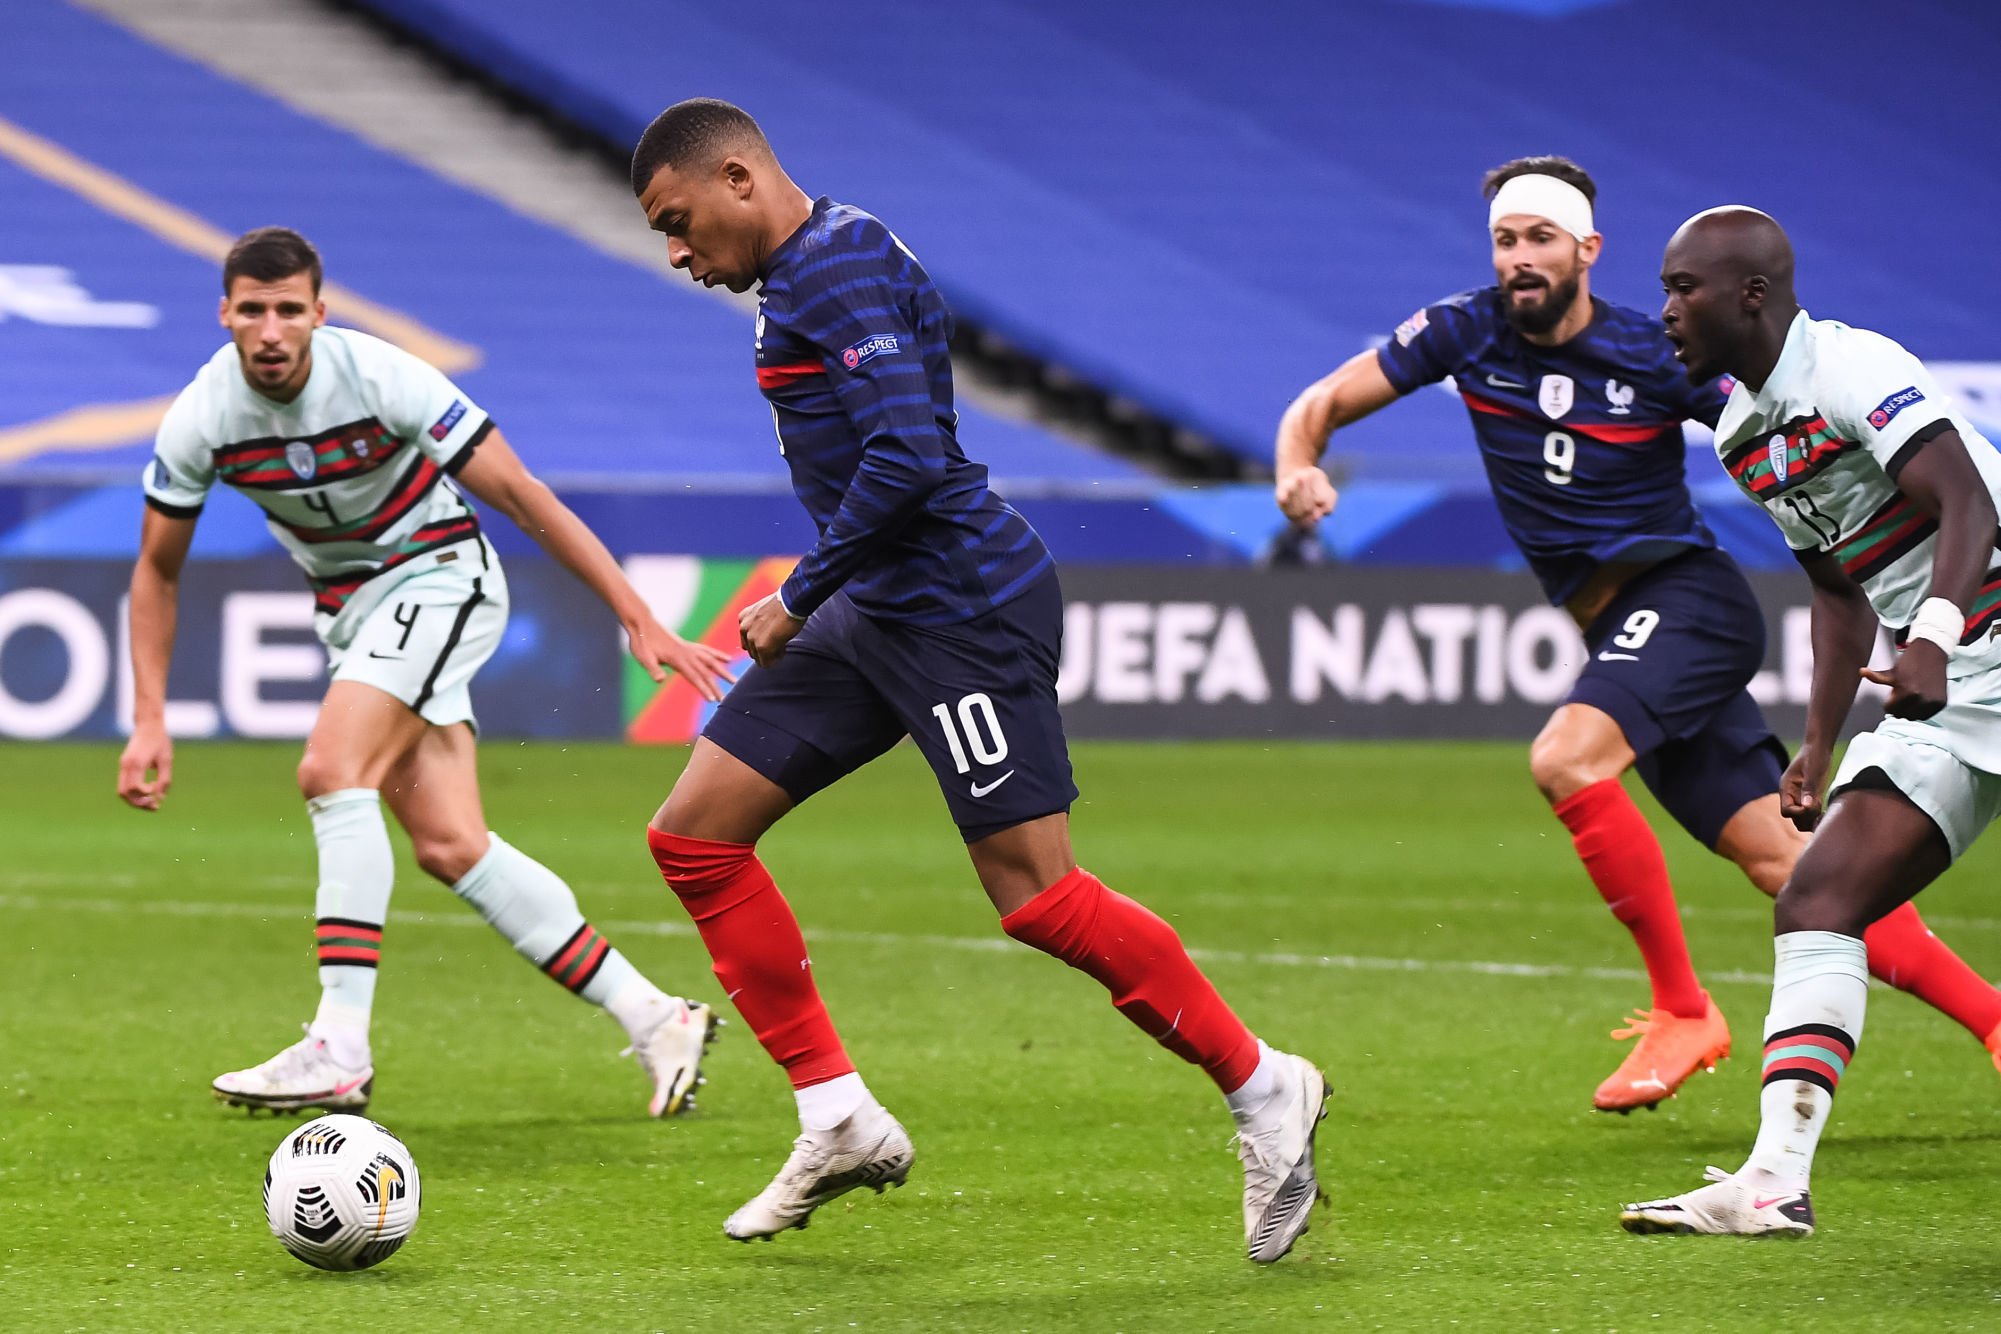 Kylian MBAPPE of France during the Nations League - Group 3 match between France and Portugal on October 11, 2020 in Paris, France. (Photo by Baptiste Fernandez/Icon Sport) - Kylian MBAPPE - Olivier GIROUD - Danilo PEREIRA - Stade de France - Paris (France)